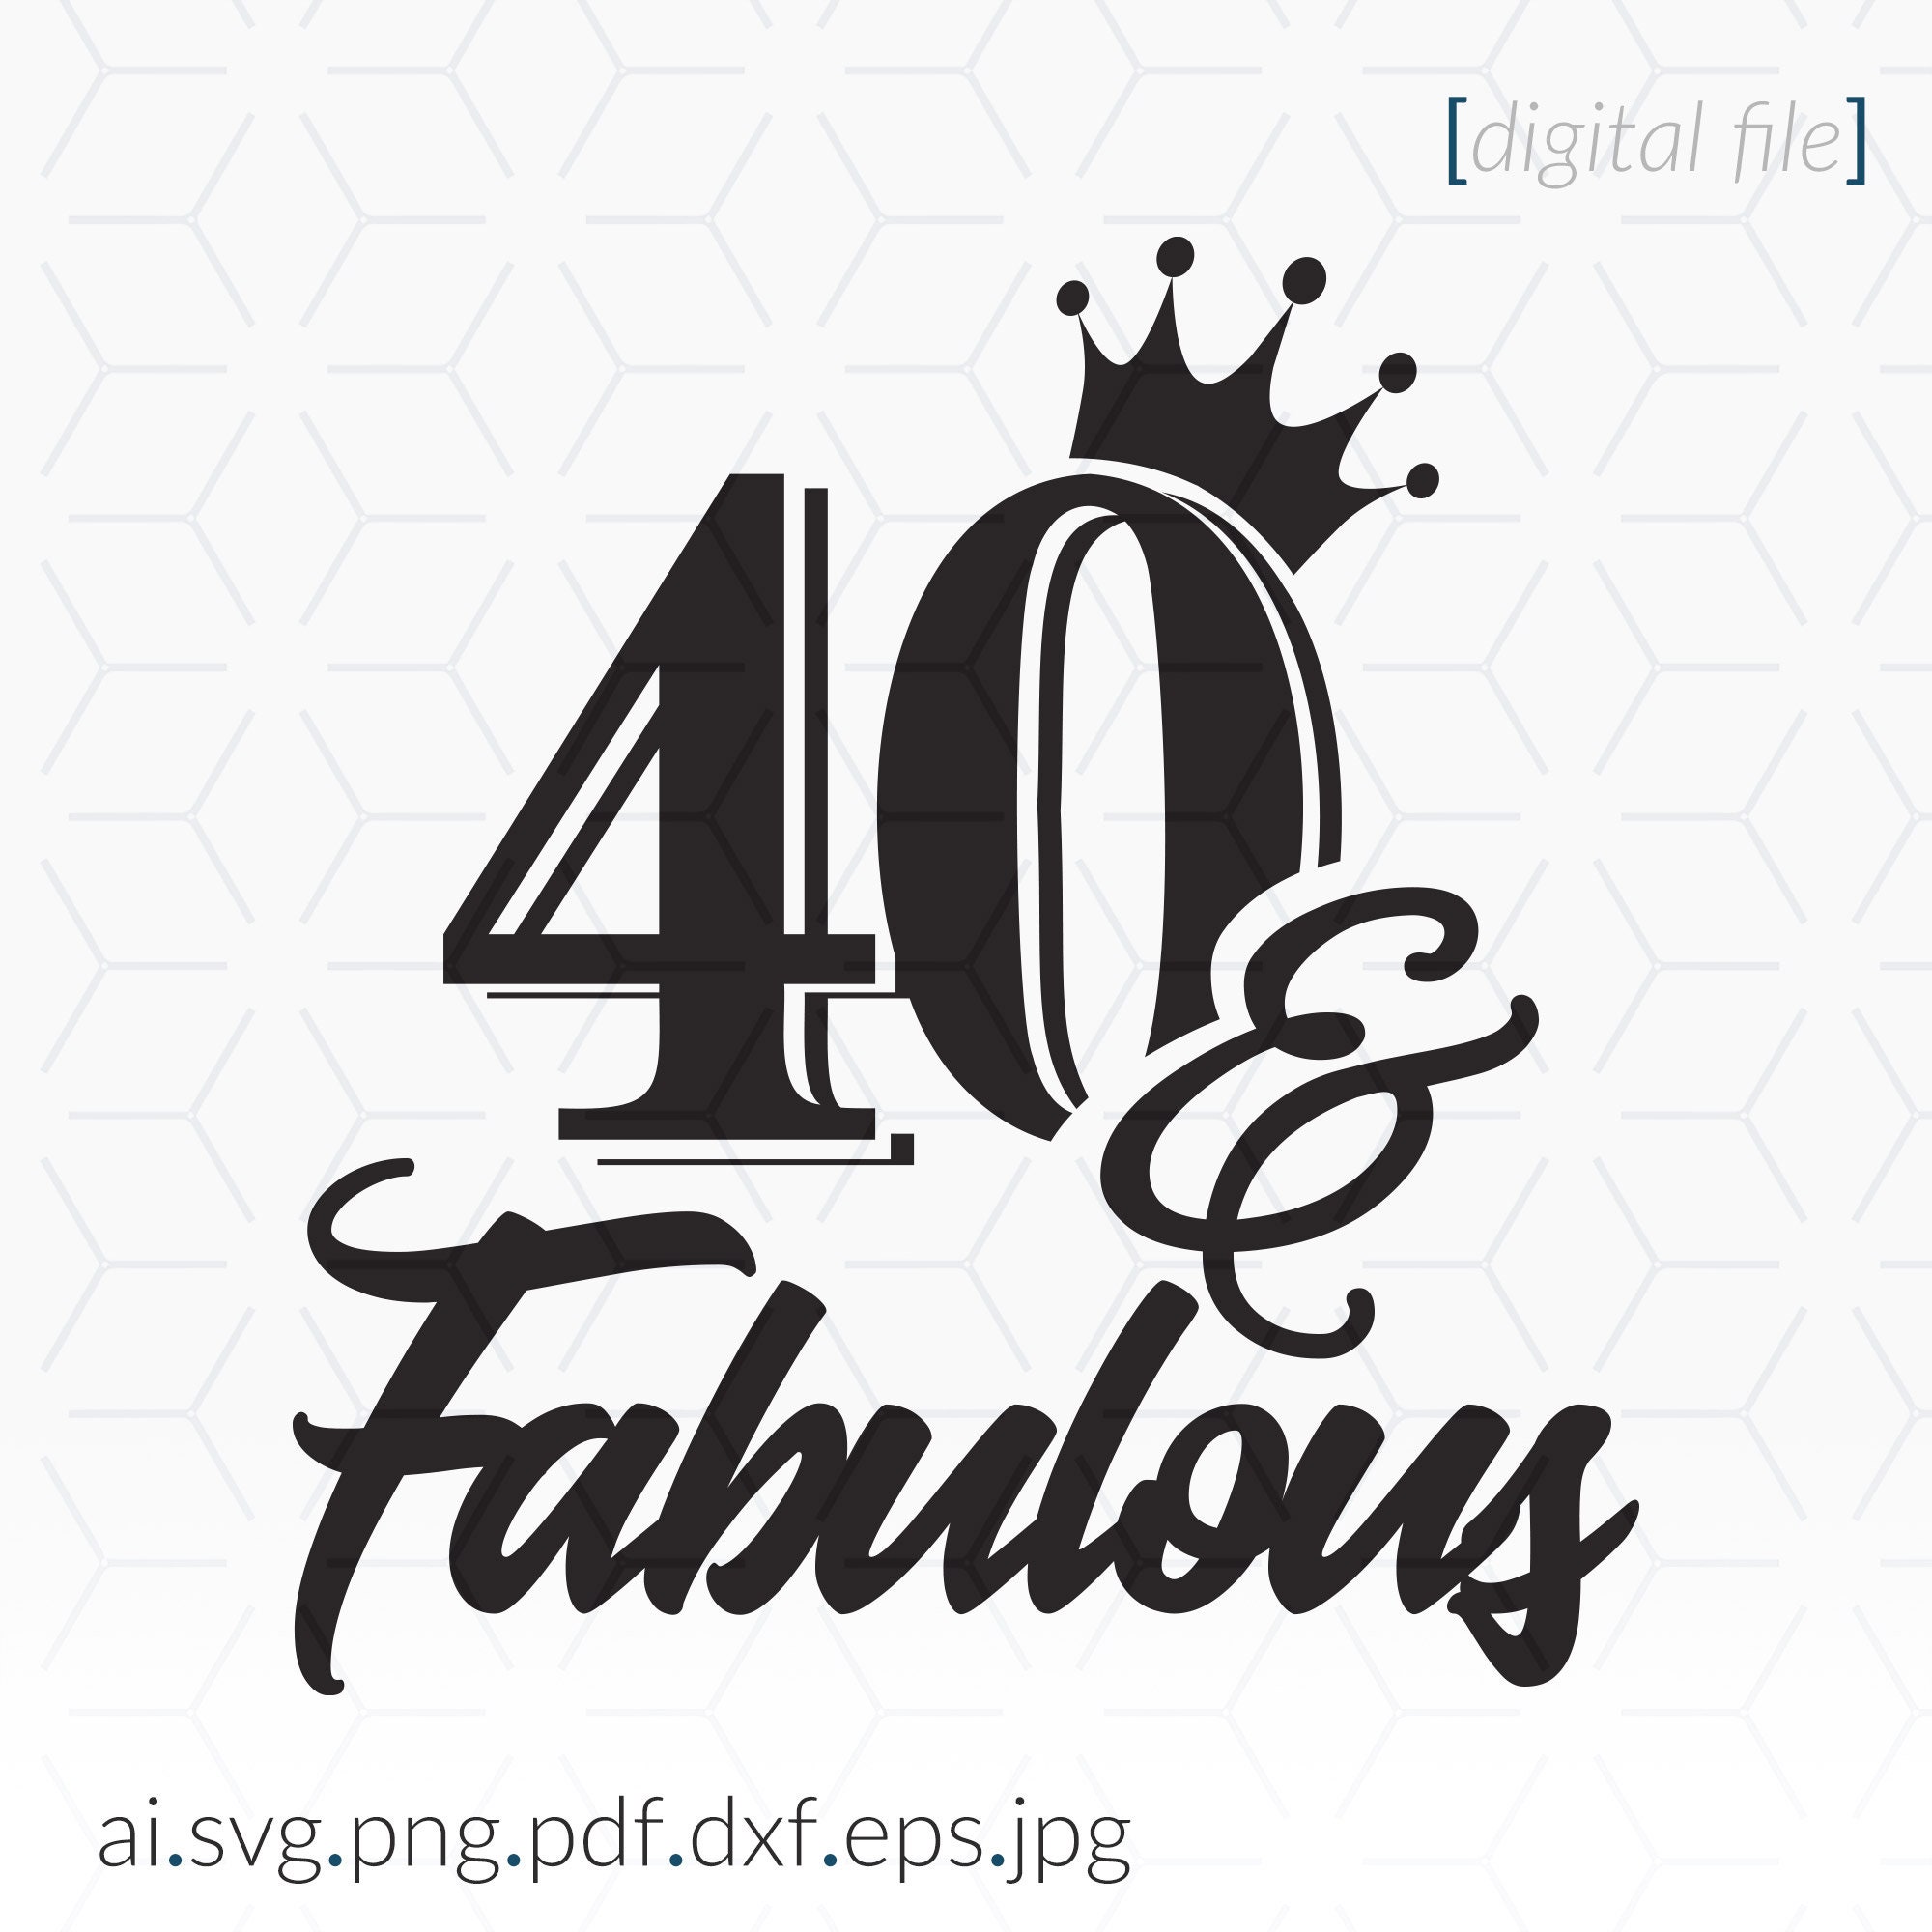 Fabulous 40 Svg File For Cutting And Printing Forty And Etsy